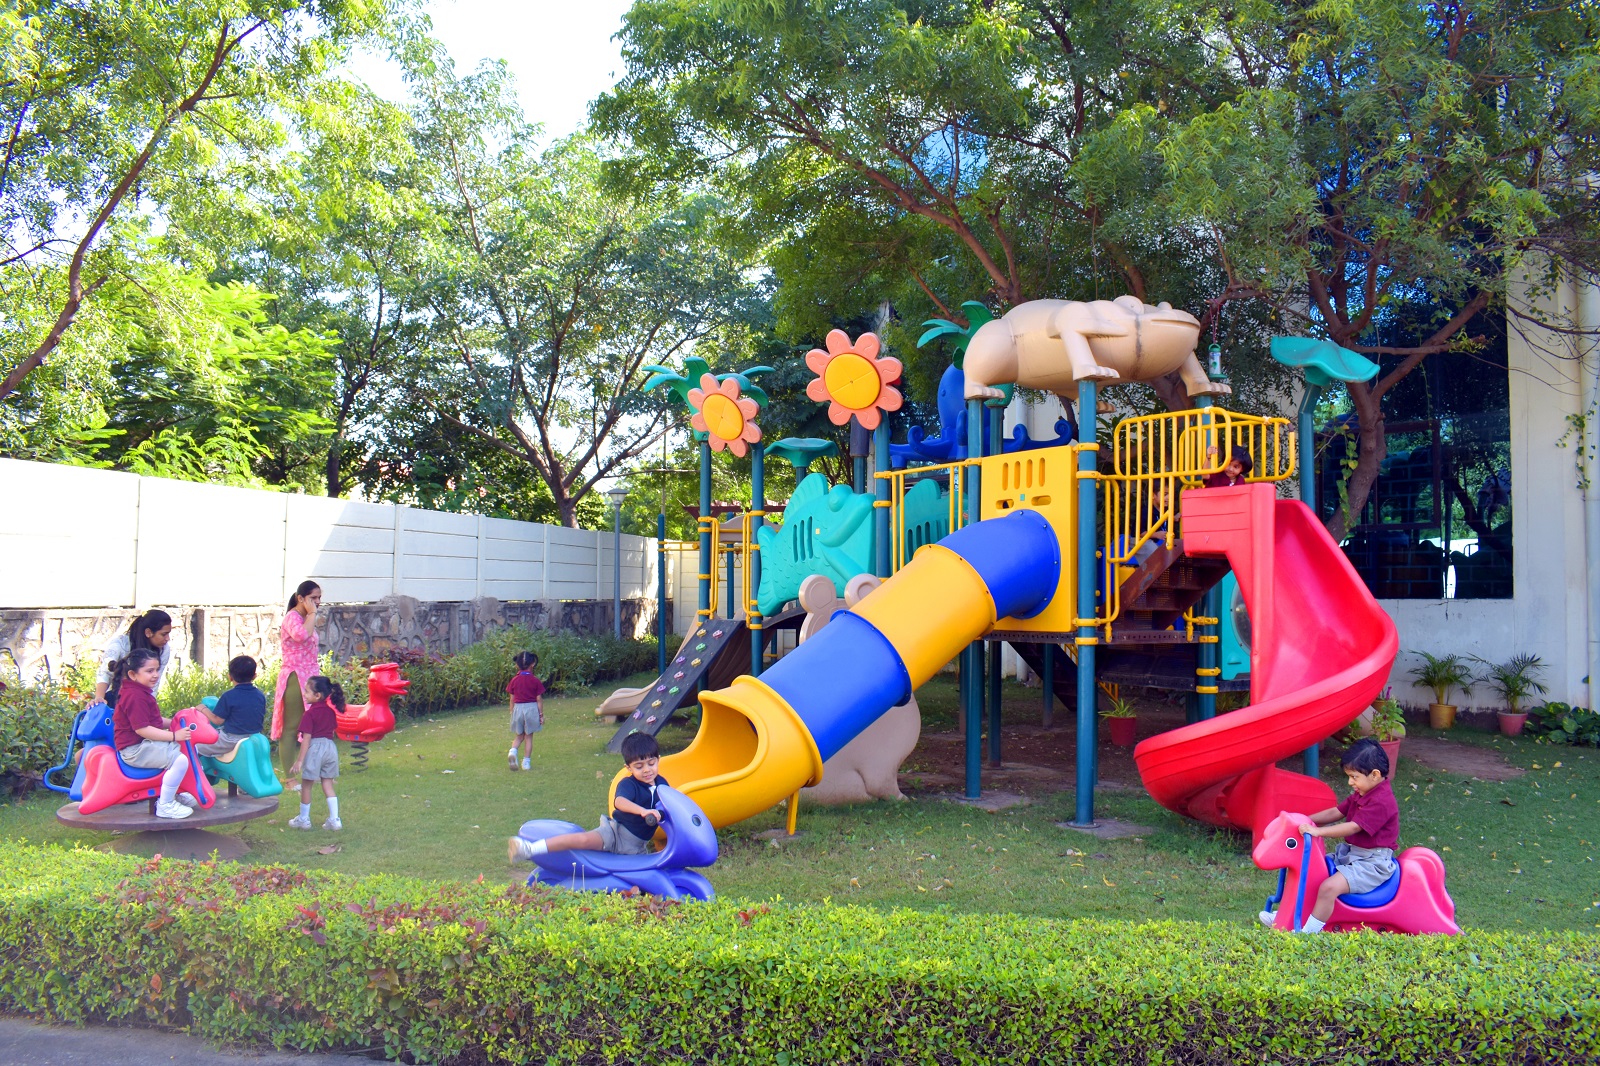 Outdoor Play Area